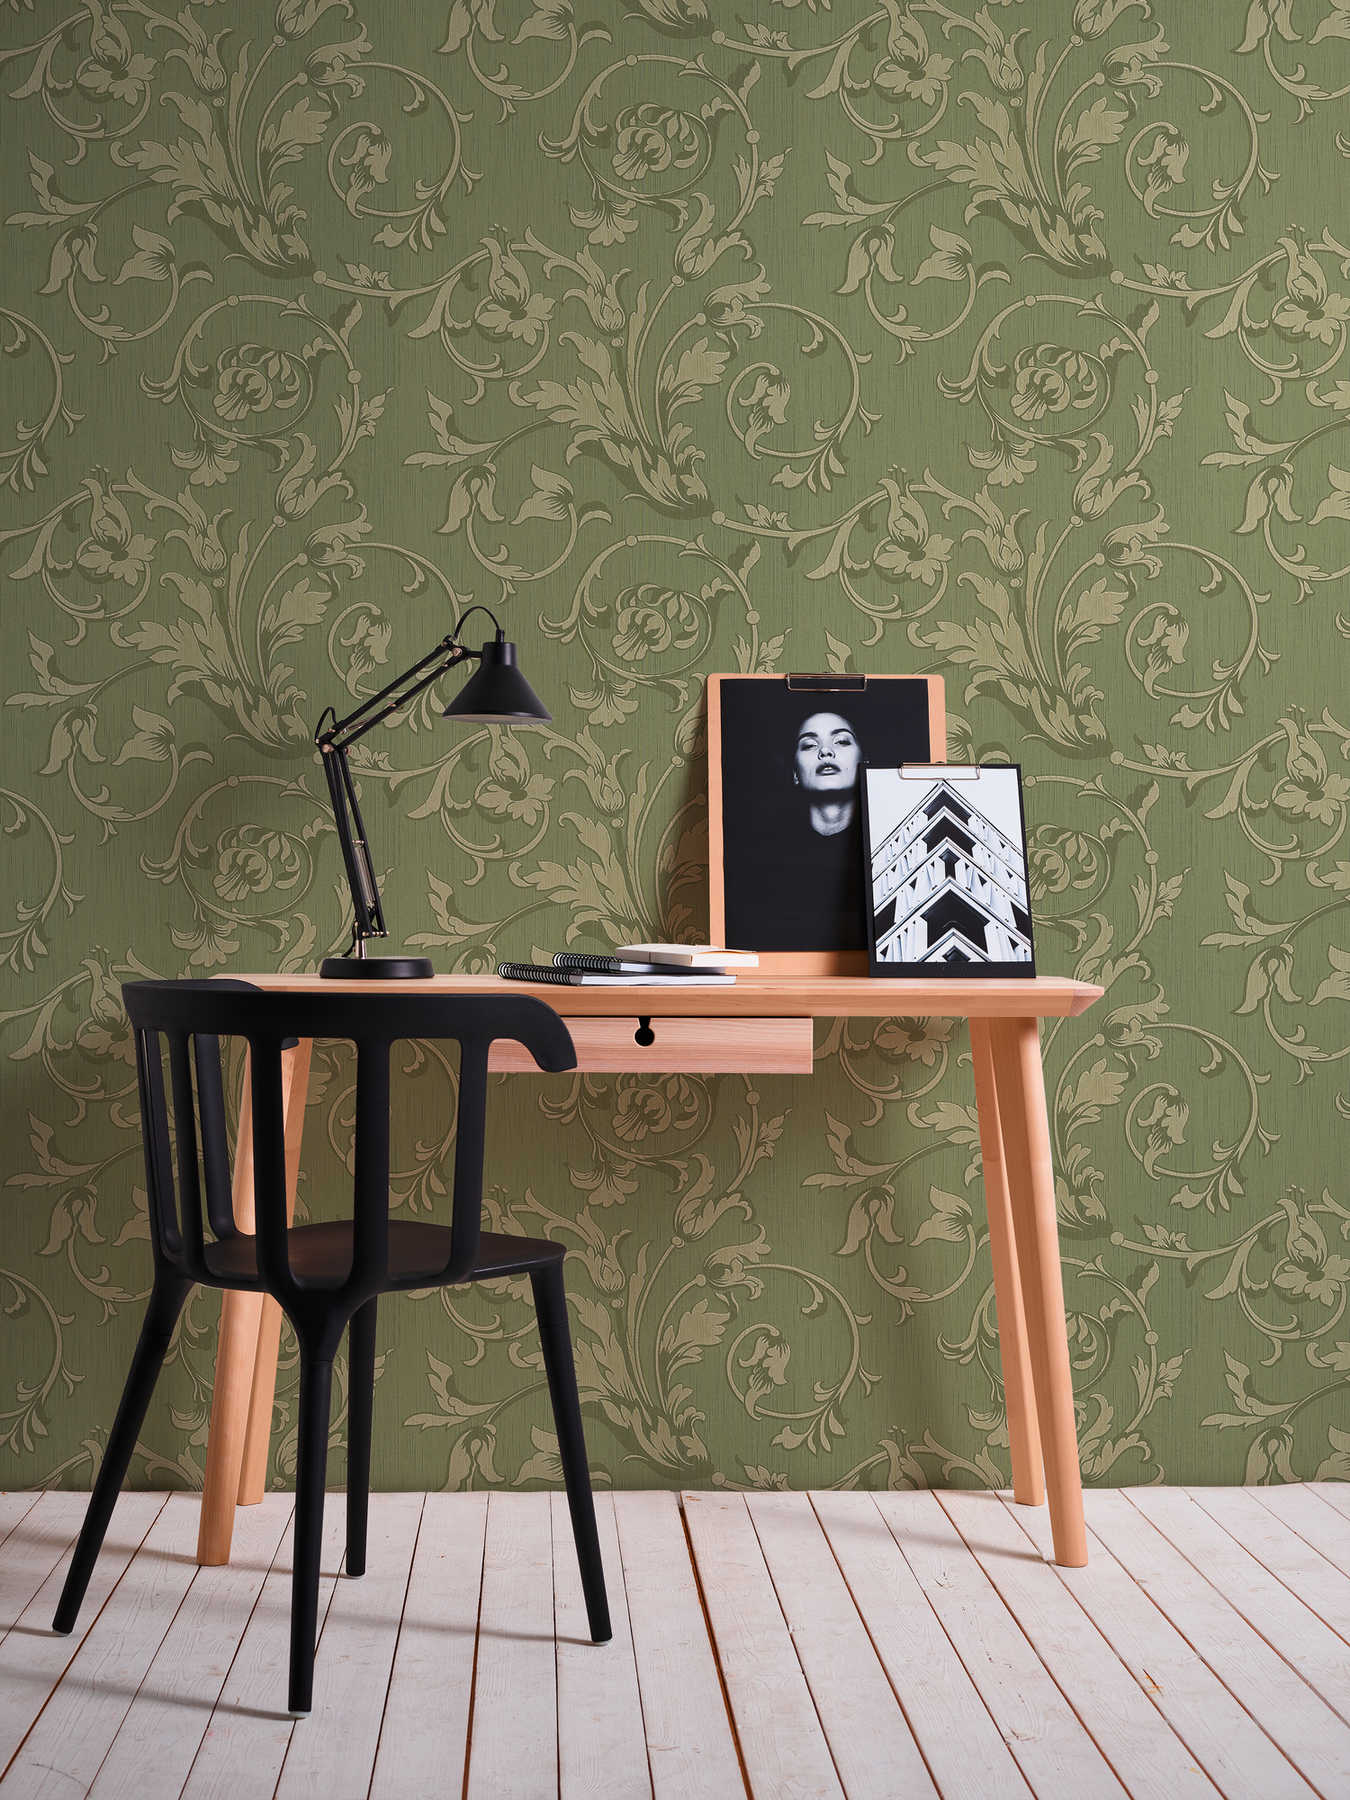             Non-woven wallpaper floral ornaments with texture effect - green
        